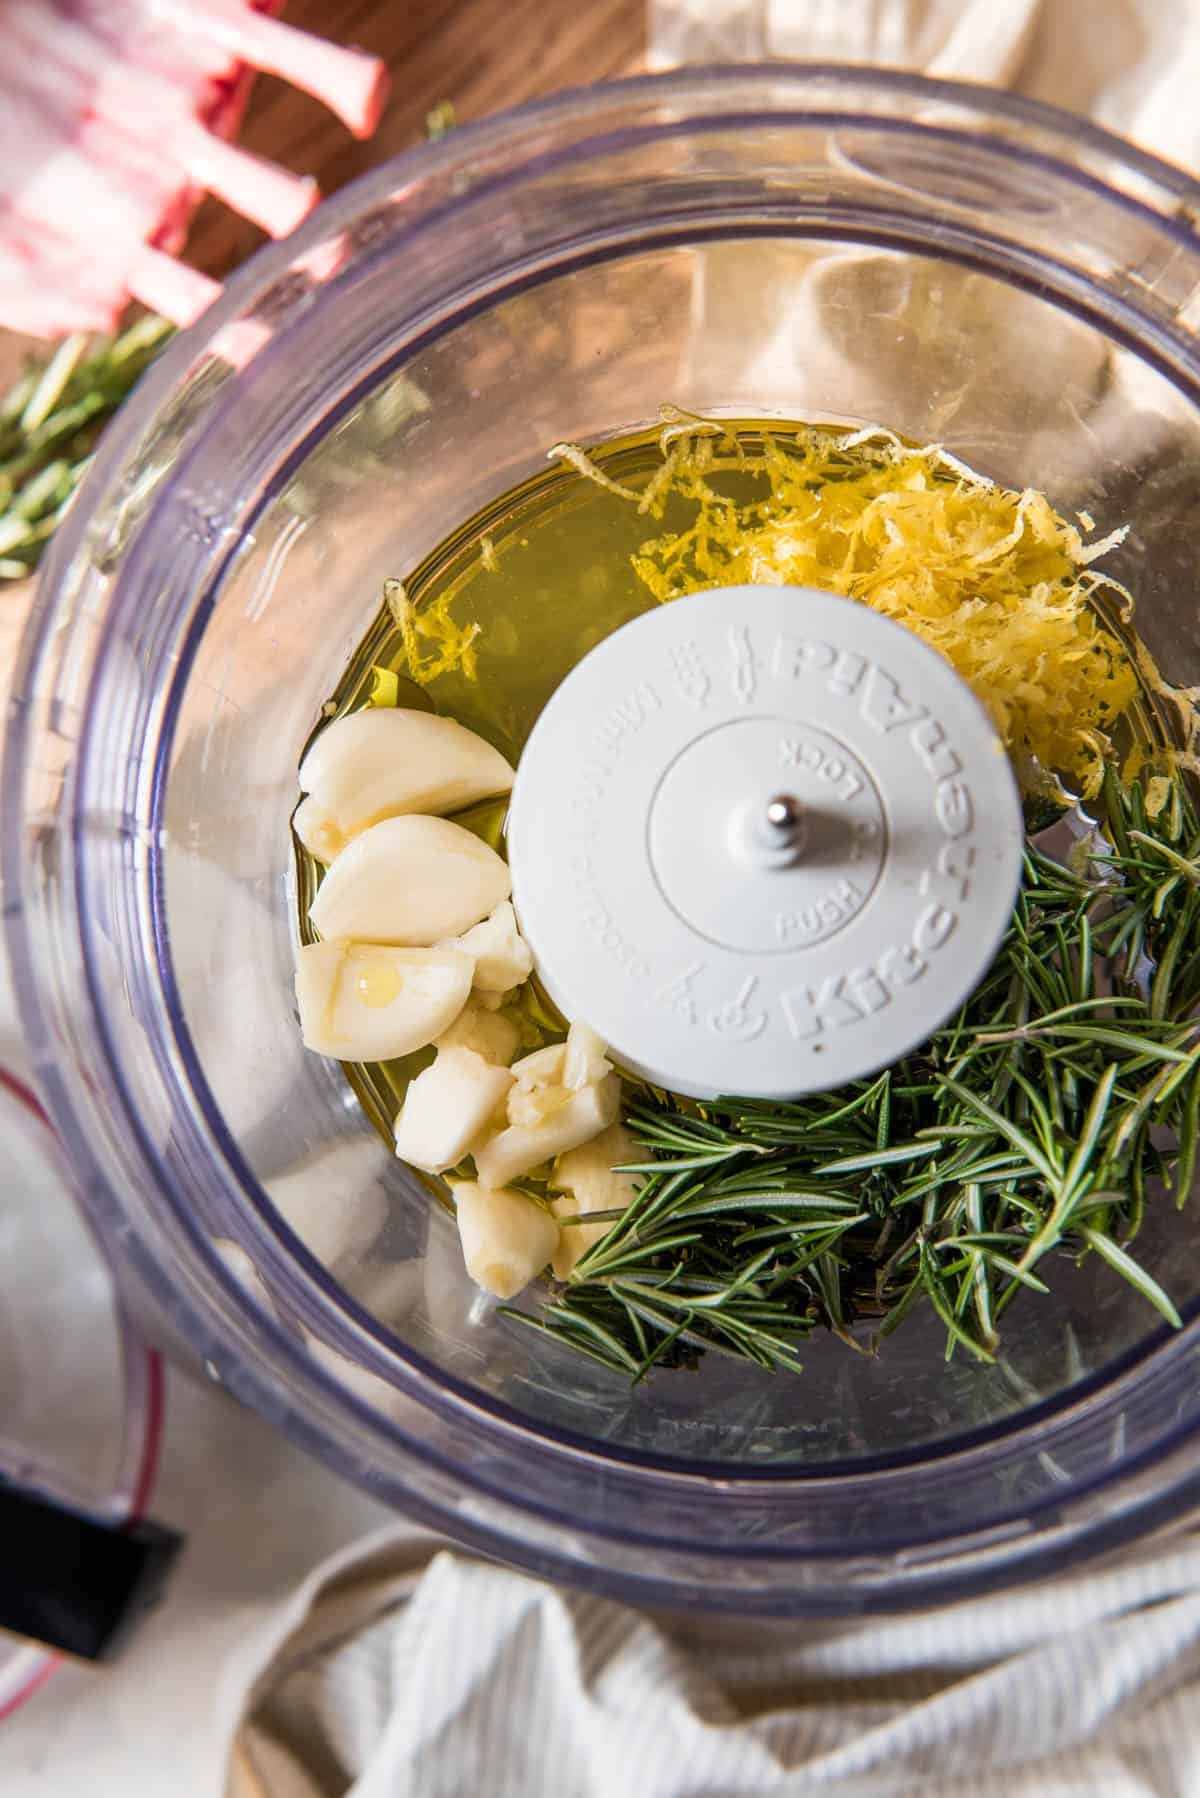 Ingredients in a food processor ready to be blended into a rack of lamb marinade consisting of olive oil, garlic cloves, fresh rosemary and thyme, and the zest of one lemon.